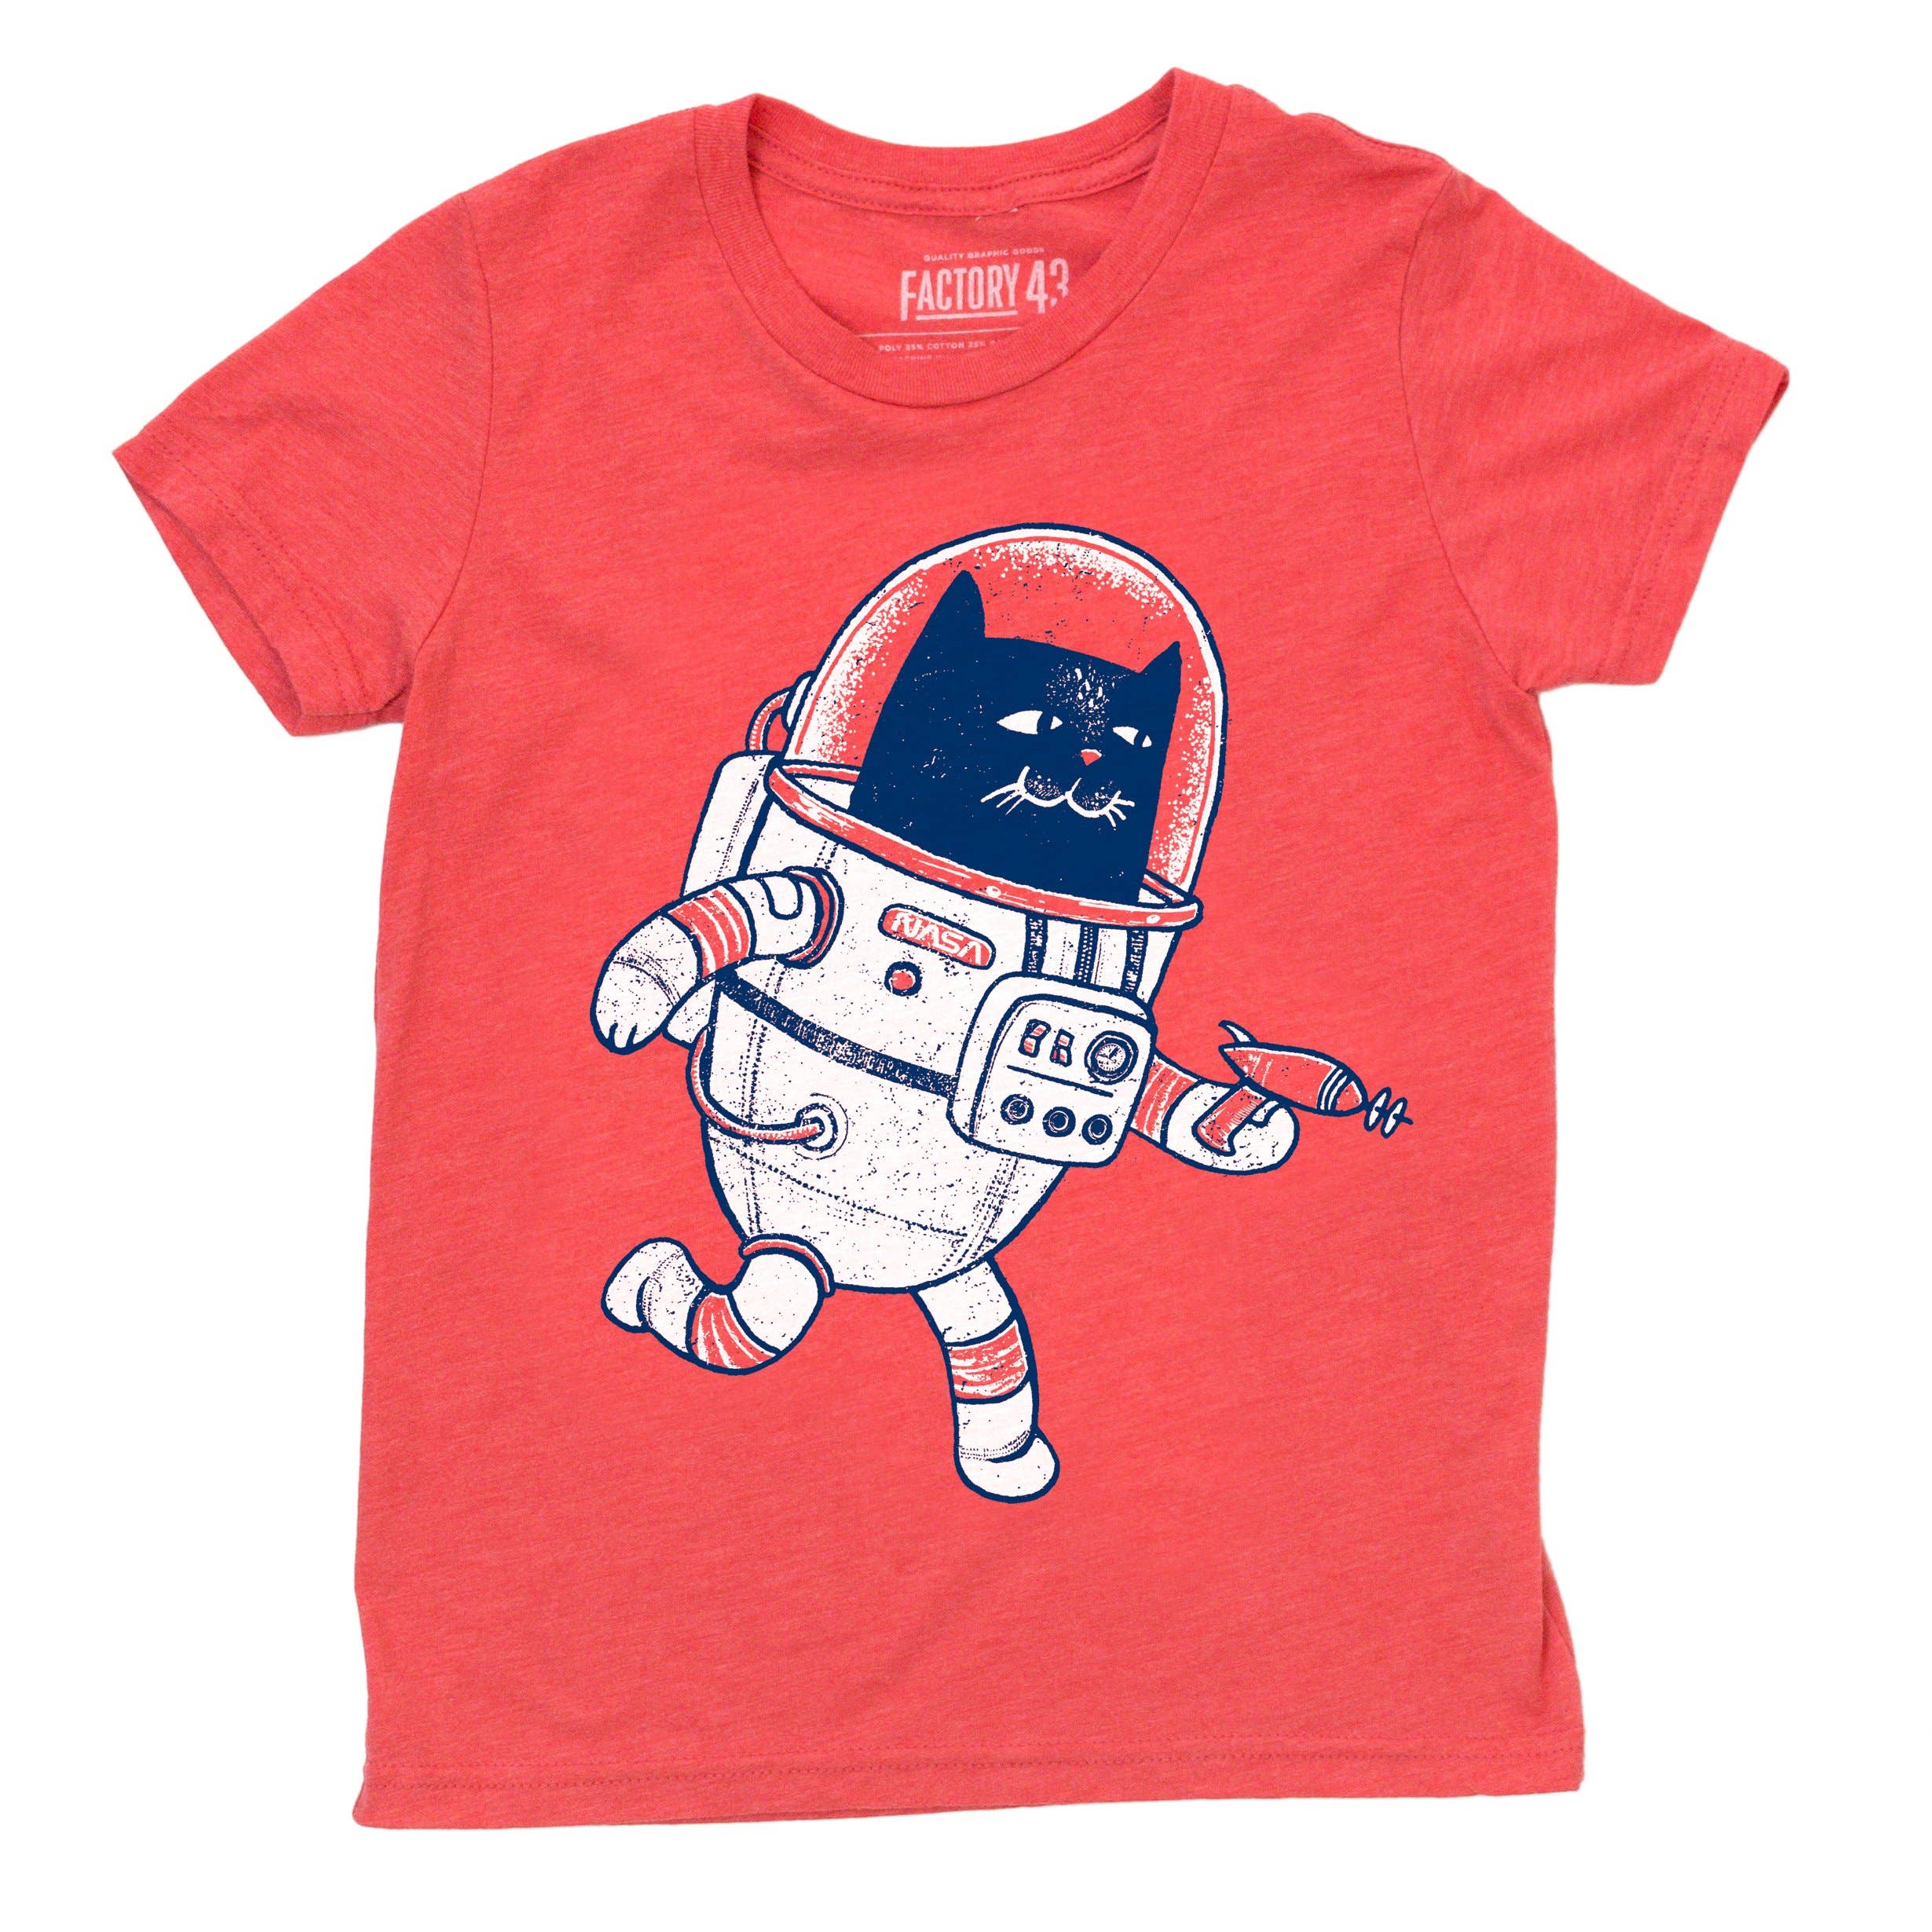 Factory 43 - Space Cat Youth Shirt: YOUTH S (6-8)